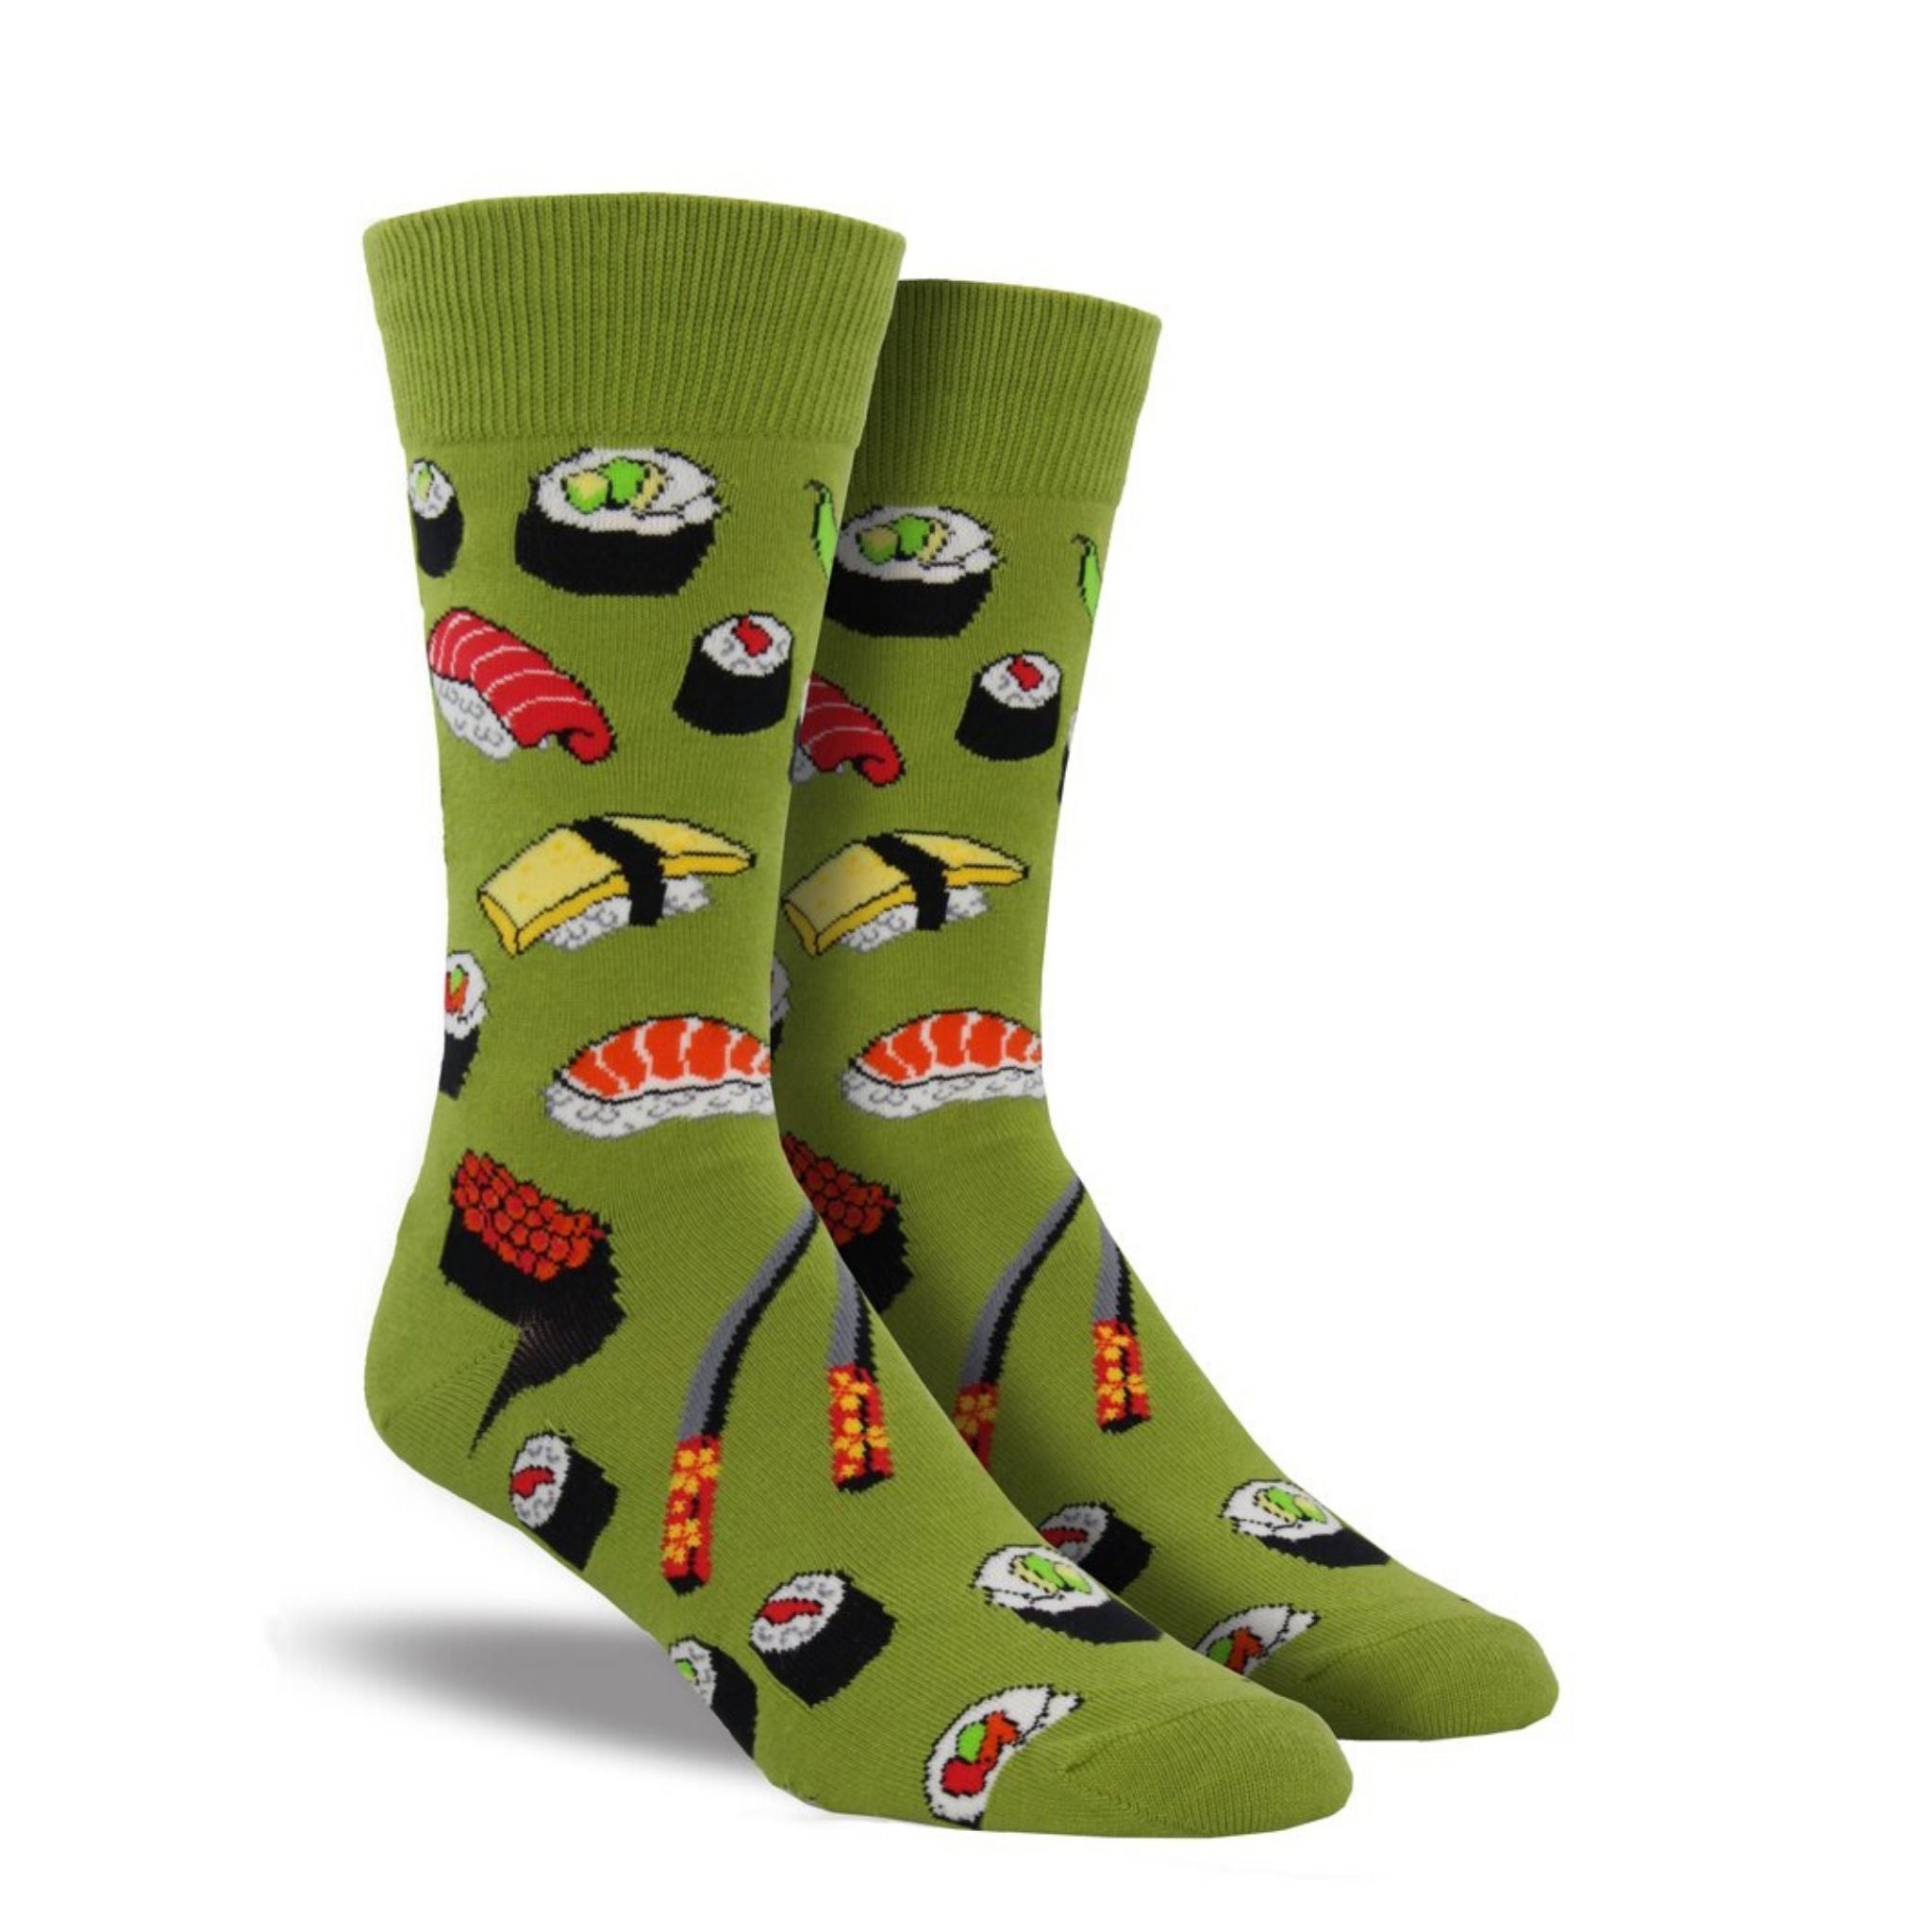 Green socks with different sushi rolls on it